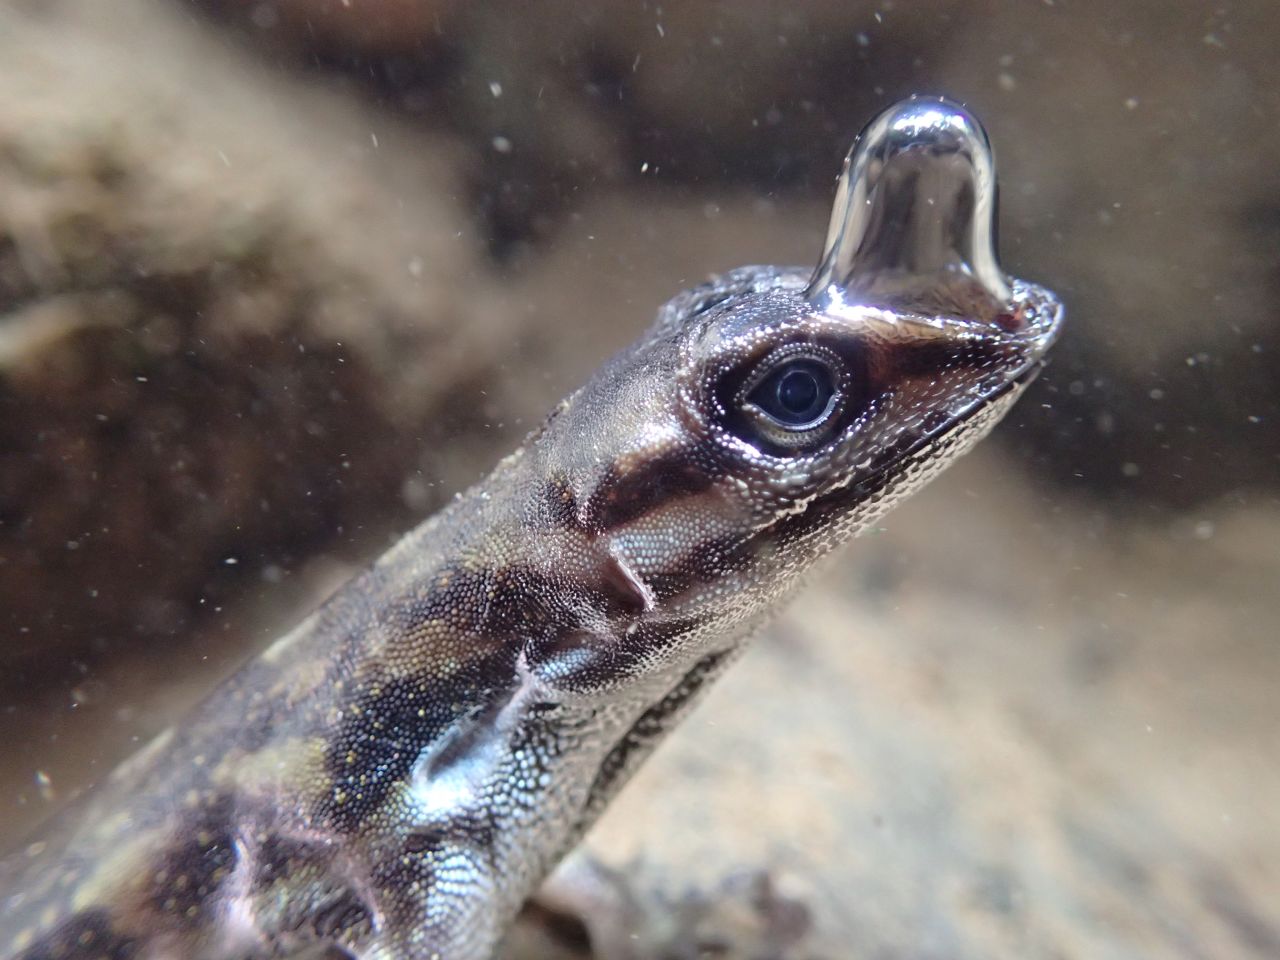 An anole lizard uses a bubble of air to breathe underwater.